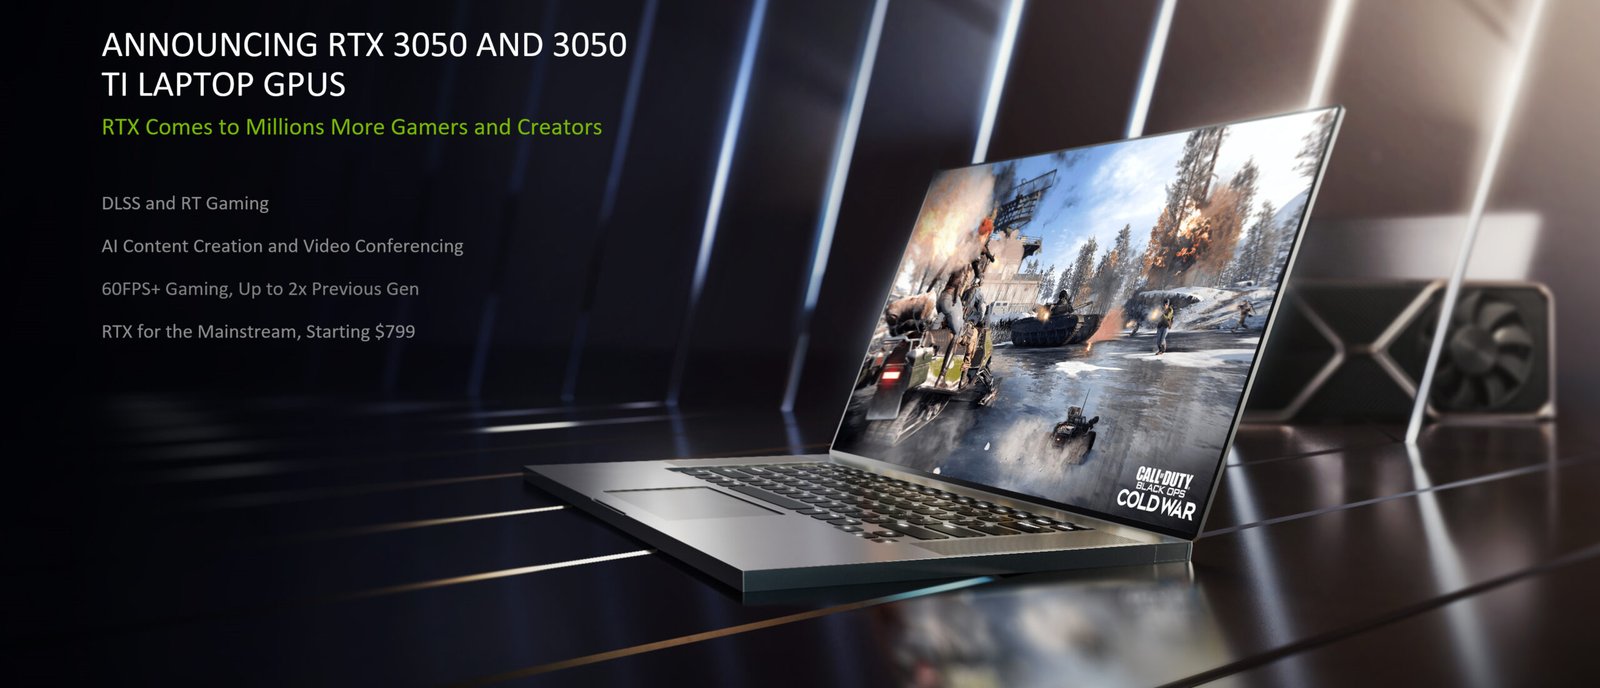 New GeForce RTX Gaming Laptops and Studio Laptop Models